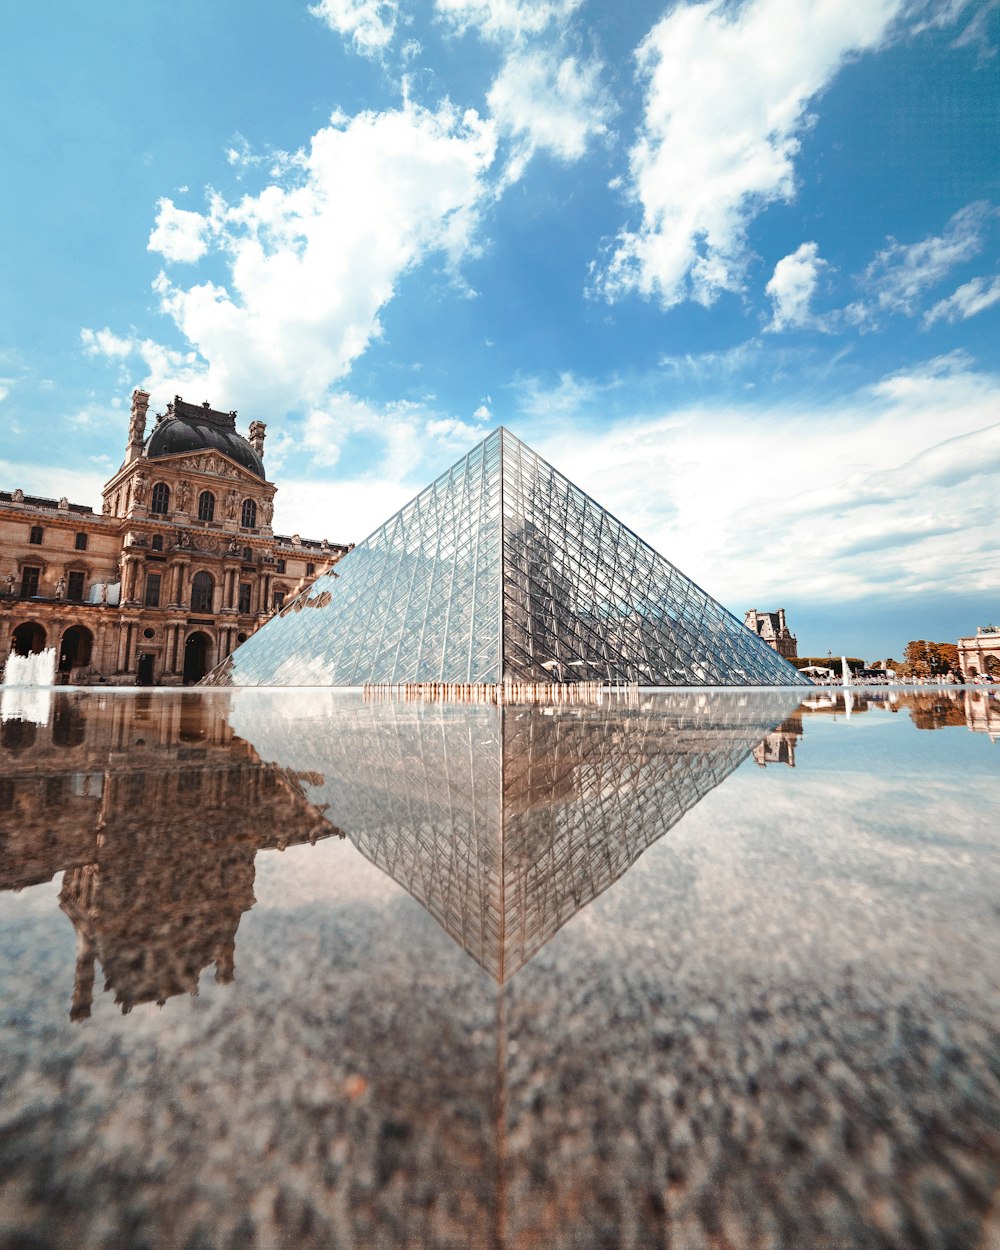 glass pyramid building near body of water during daytime